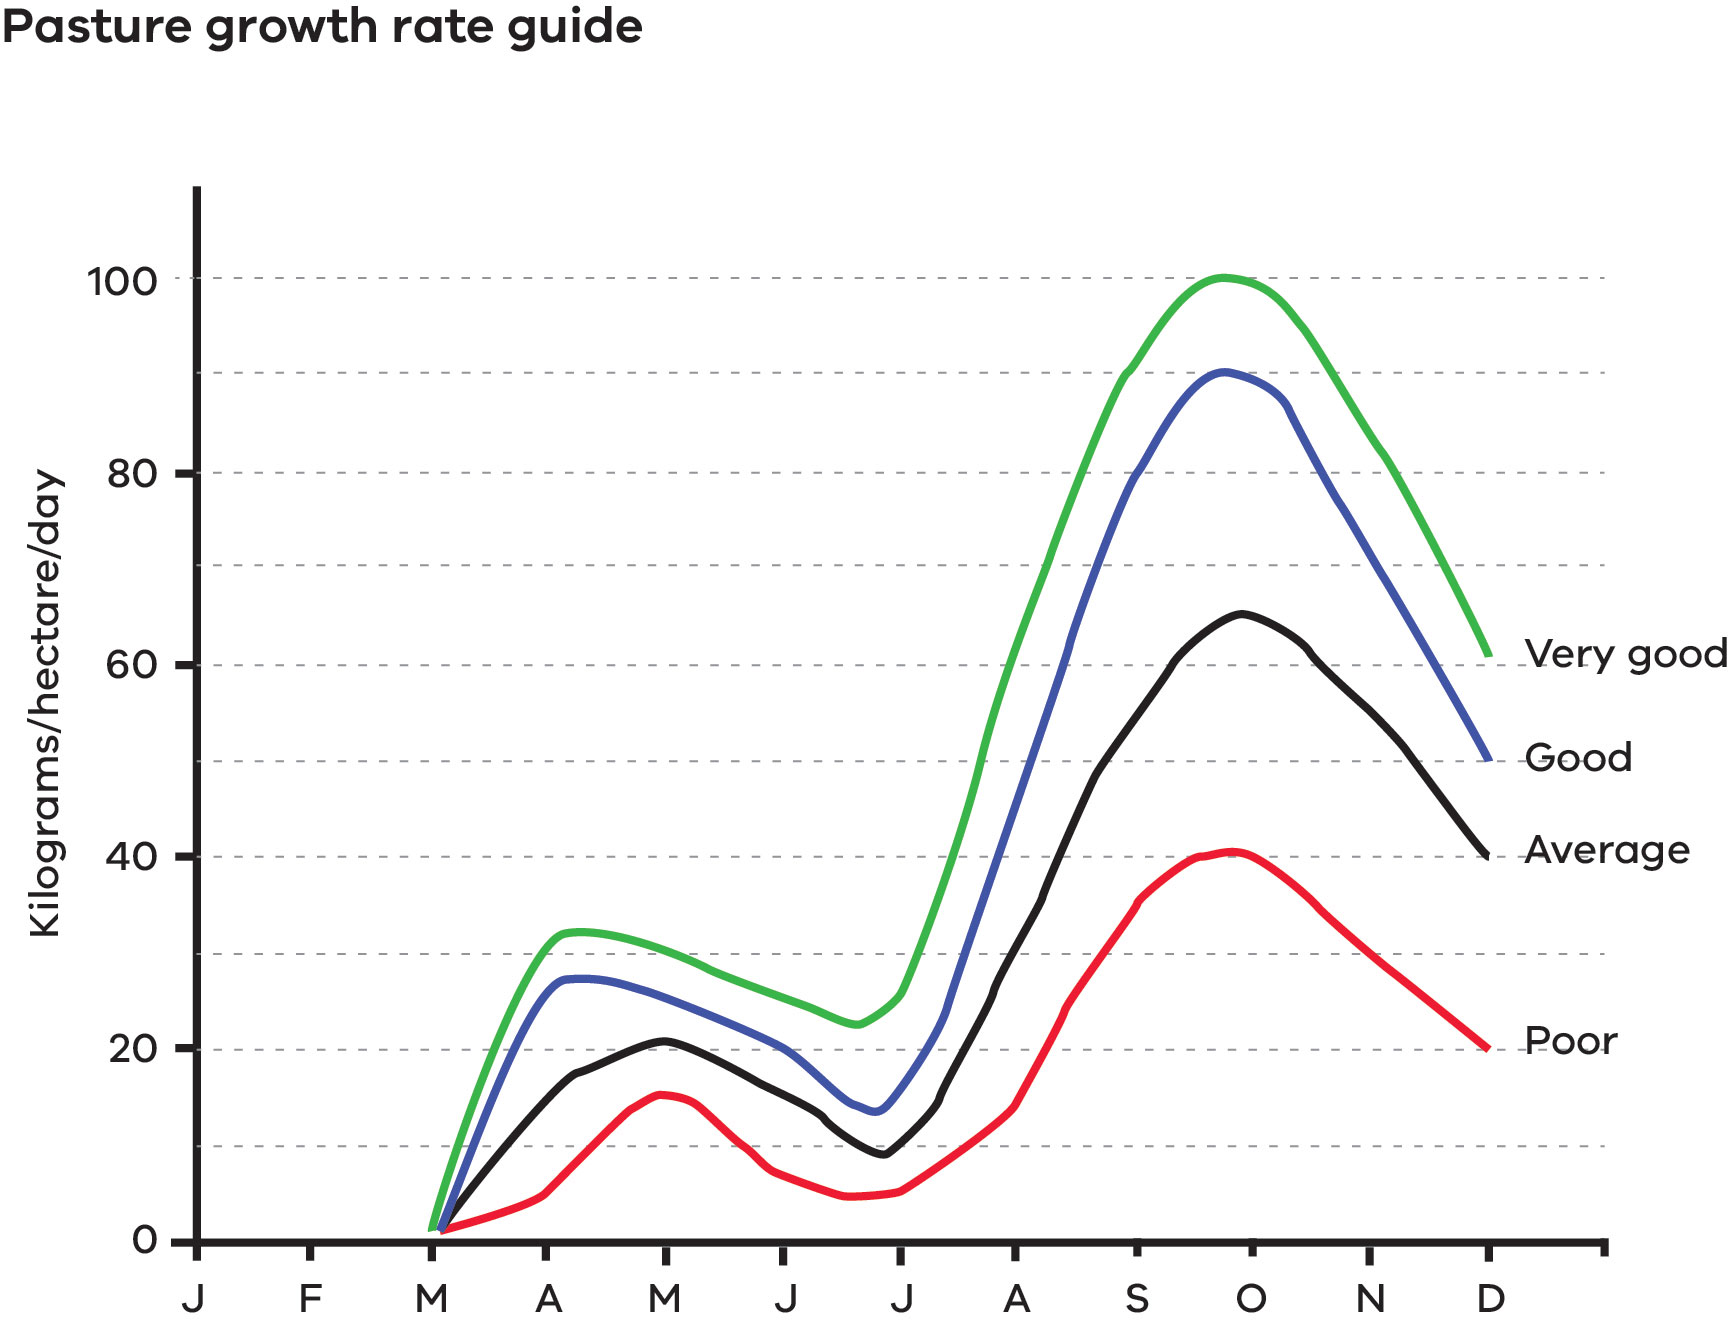 Graph showing pasture growth rates